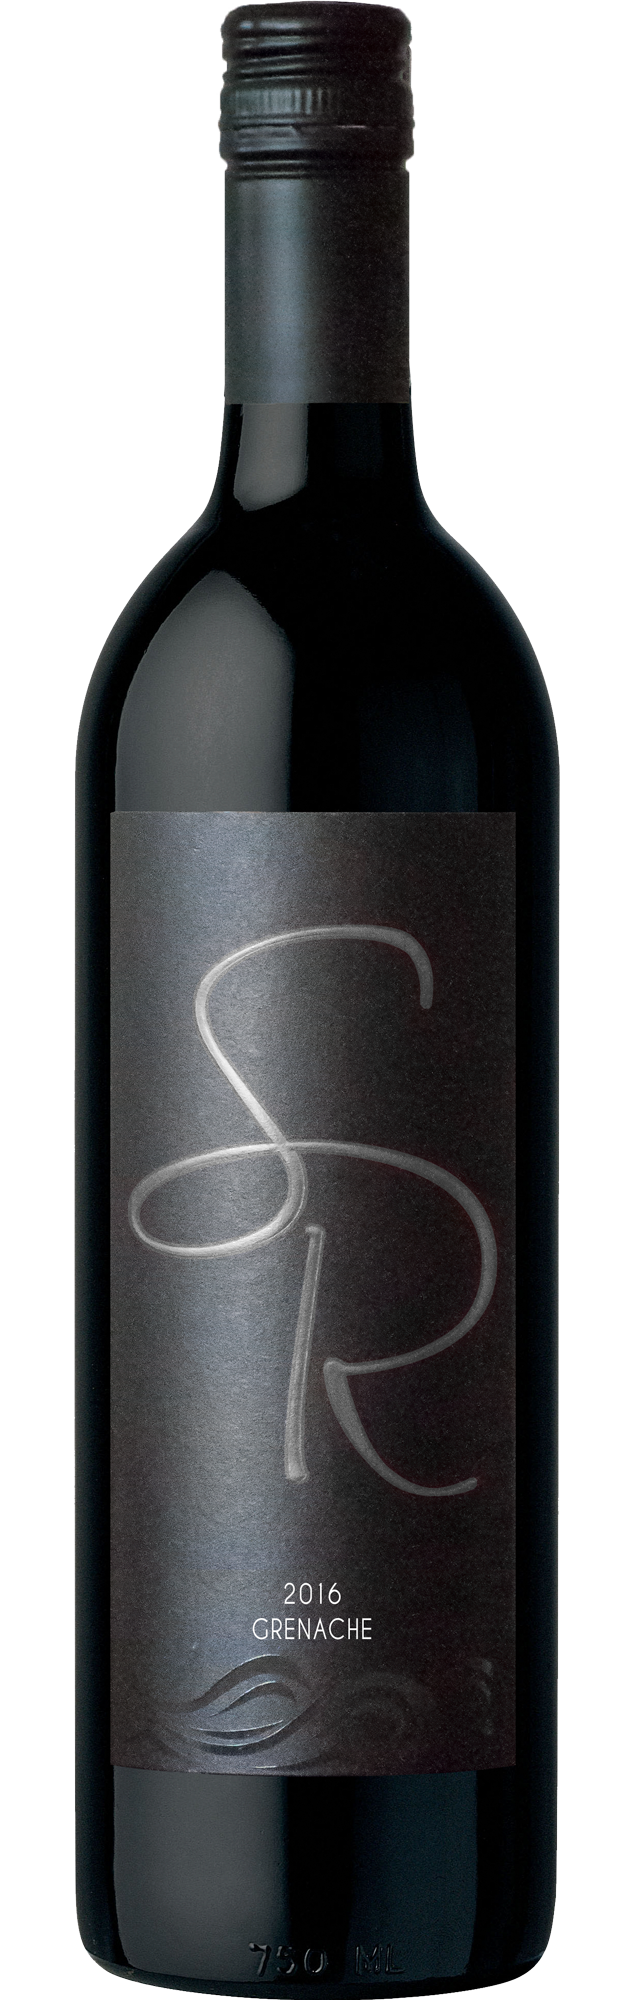 Product Image for 2016 Surfrider Grenache